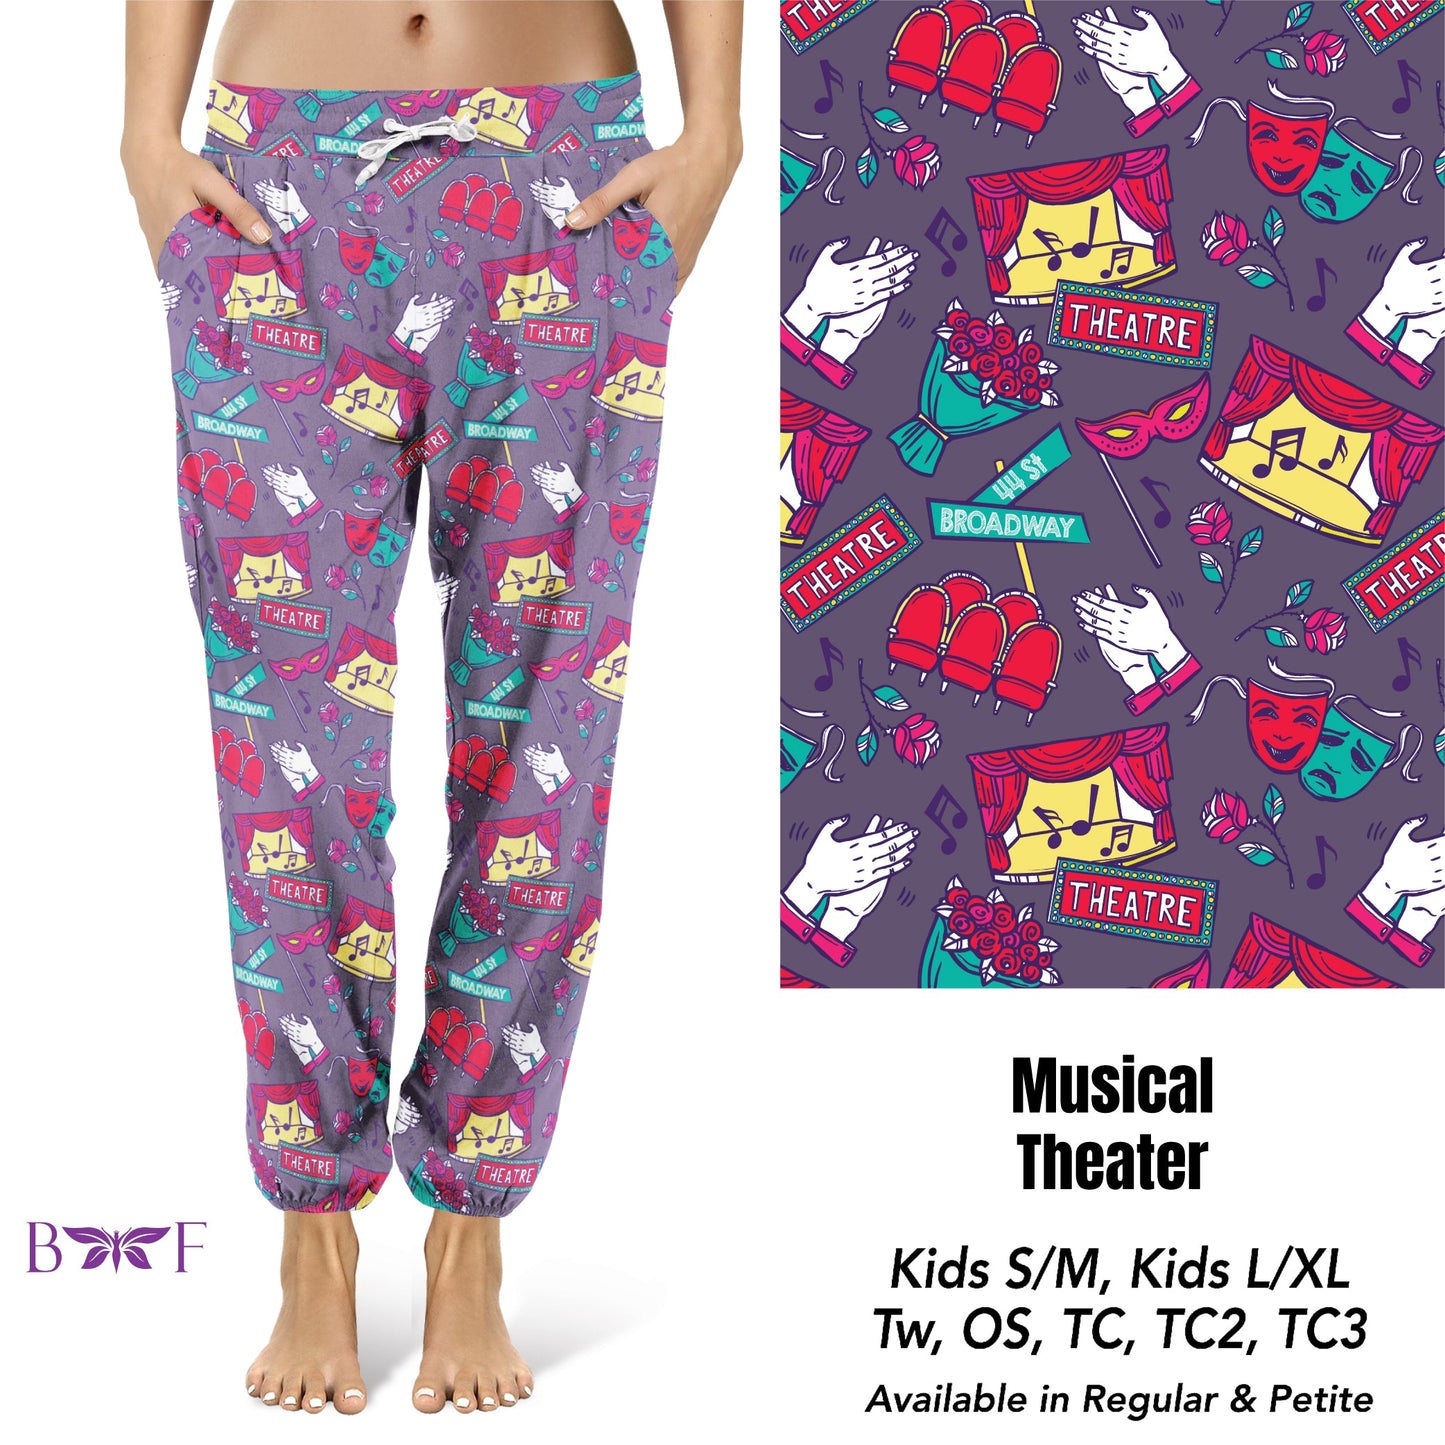 Musical Theater Leggings, Capris and Lounge Pants with pockets